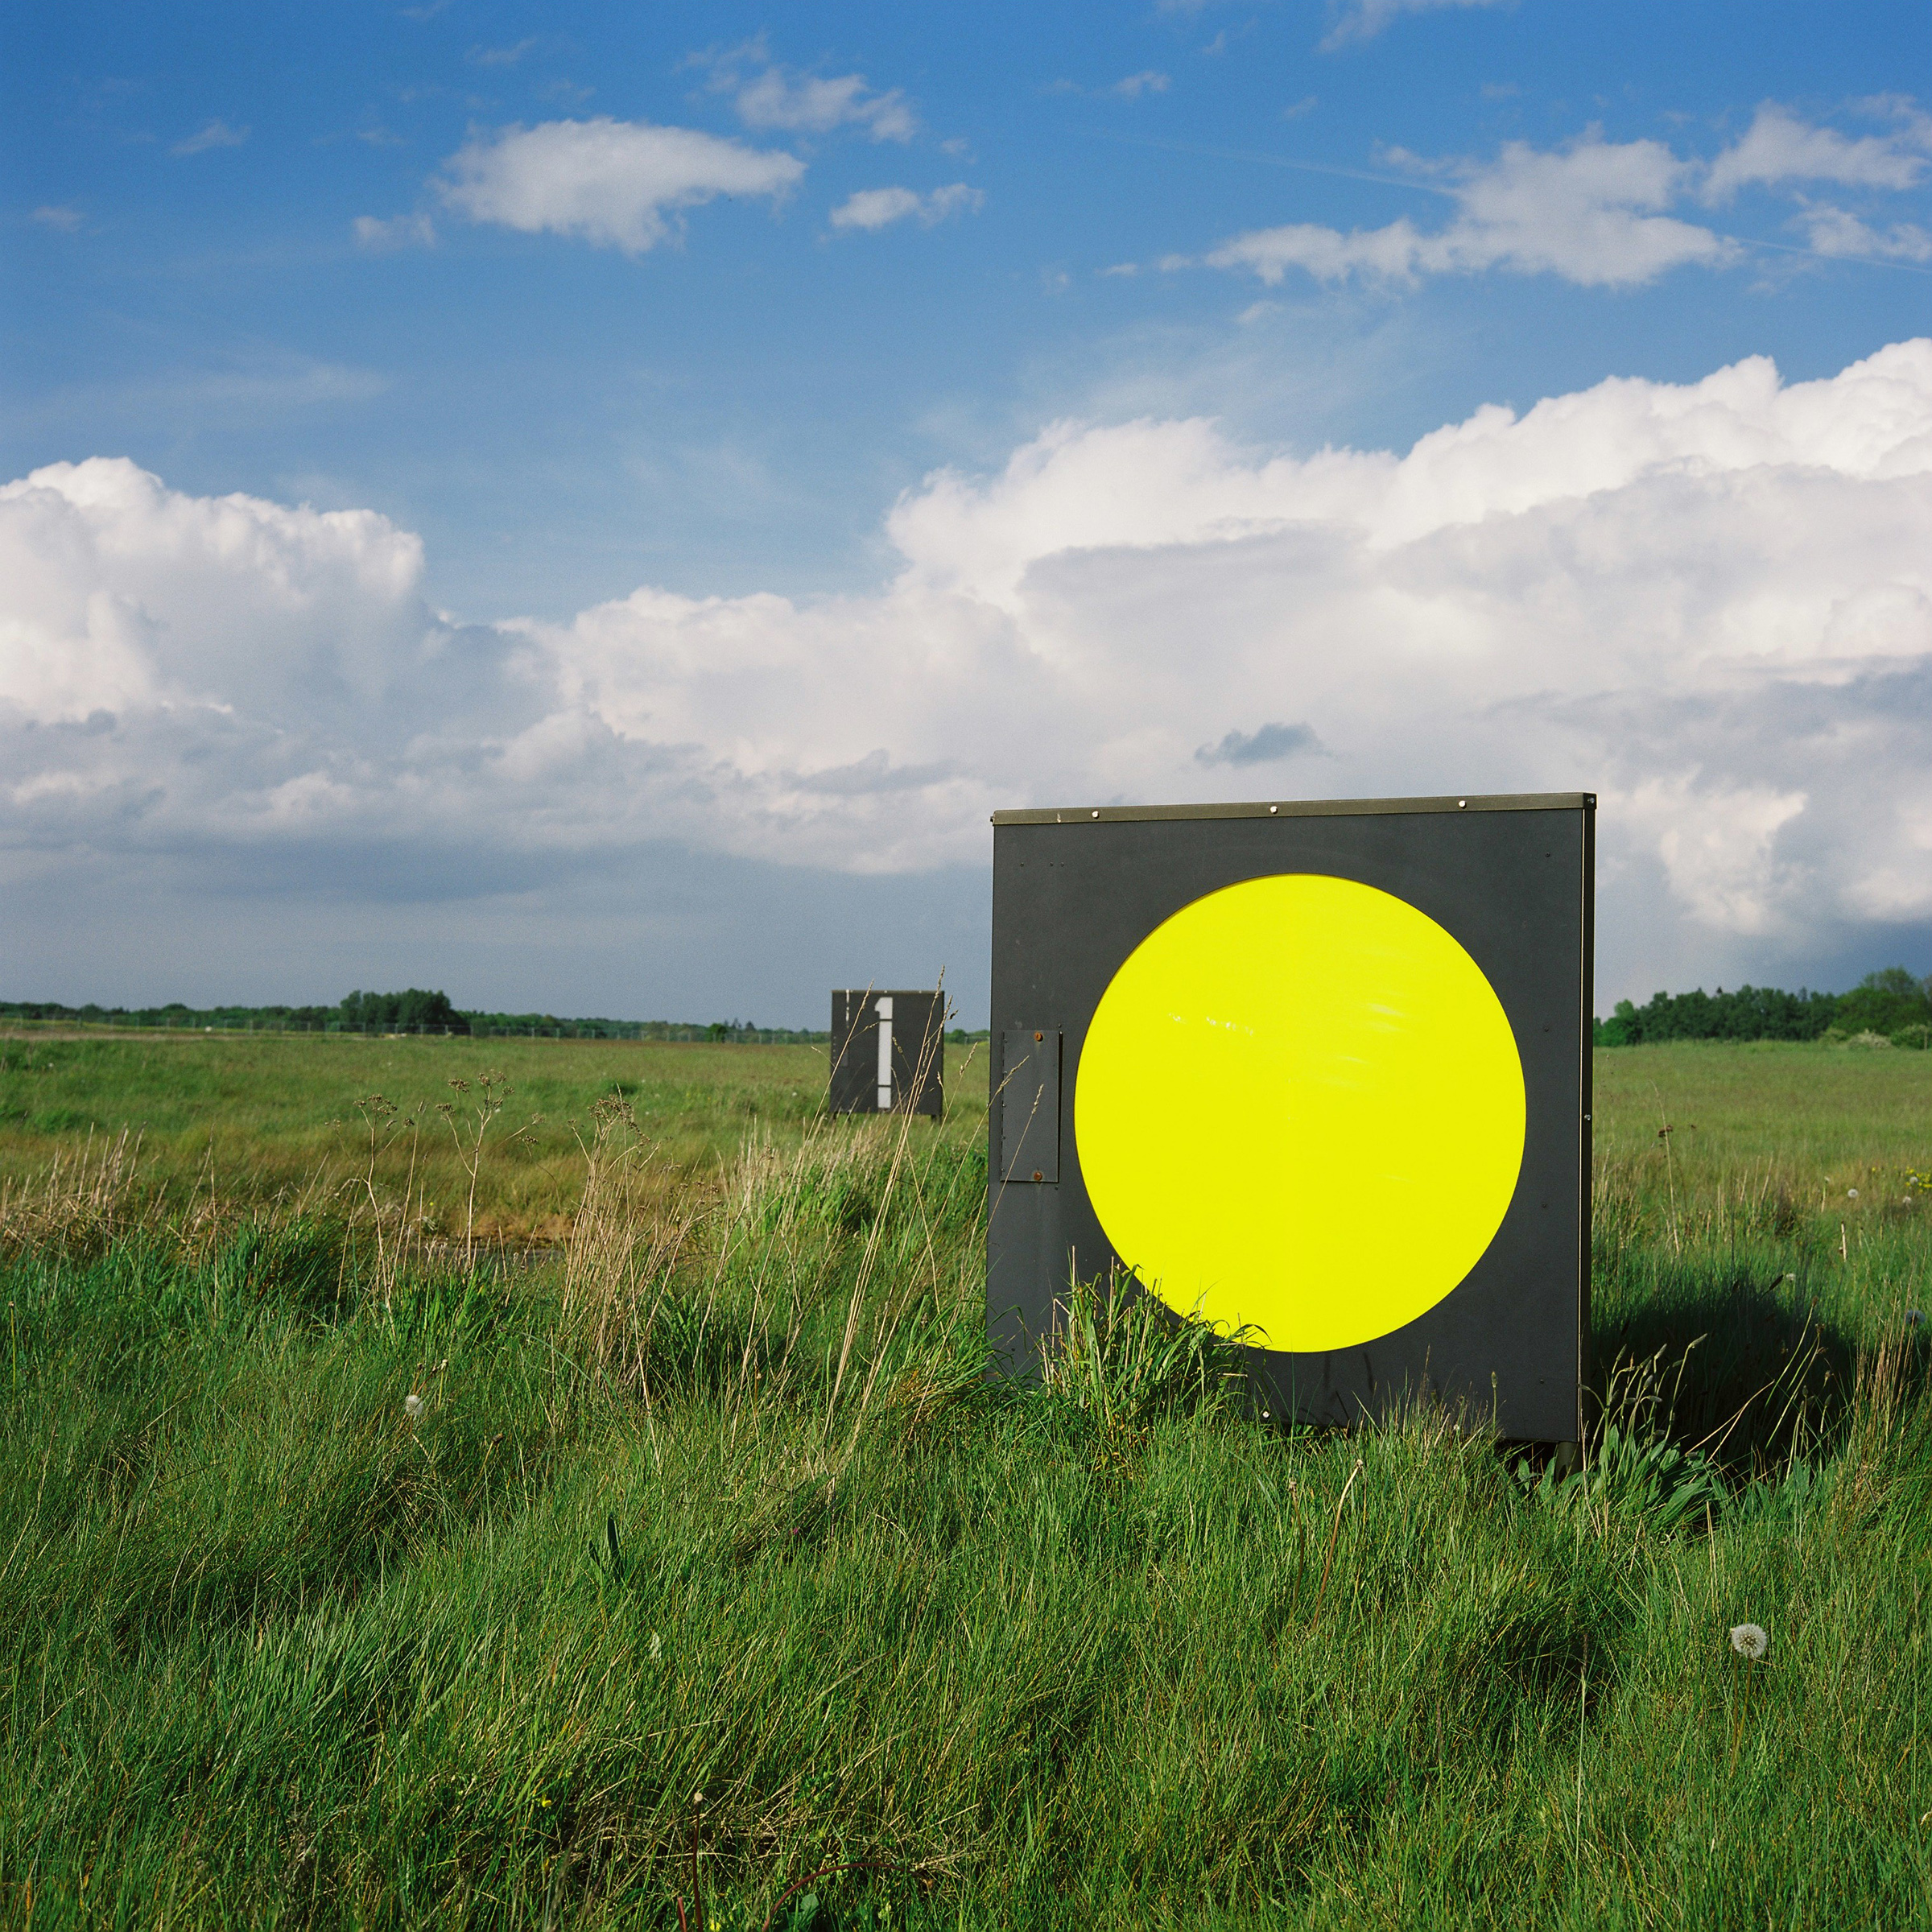 Blue sky with clouds, green grass, square marker with bright yellow circle